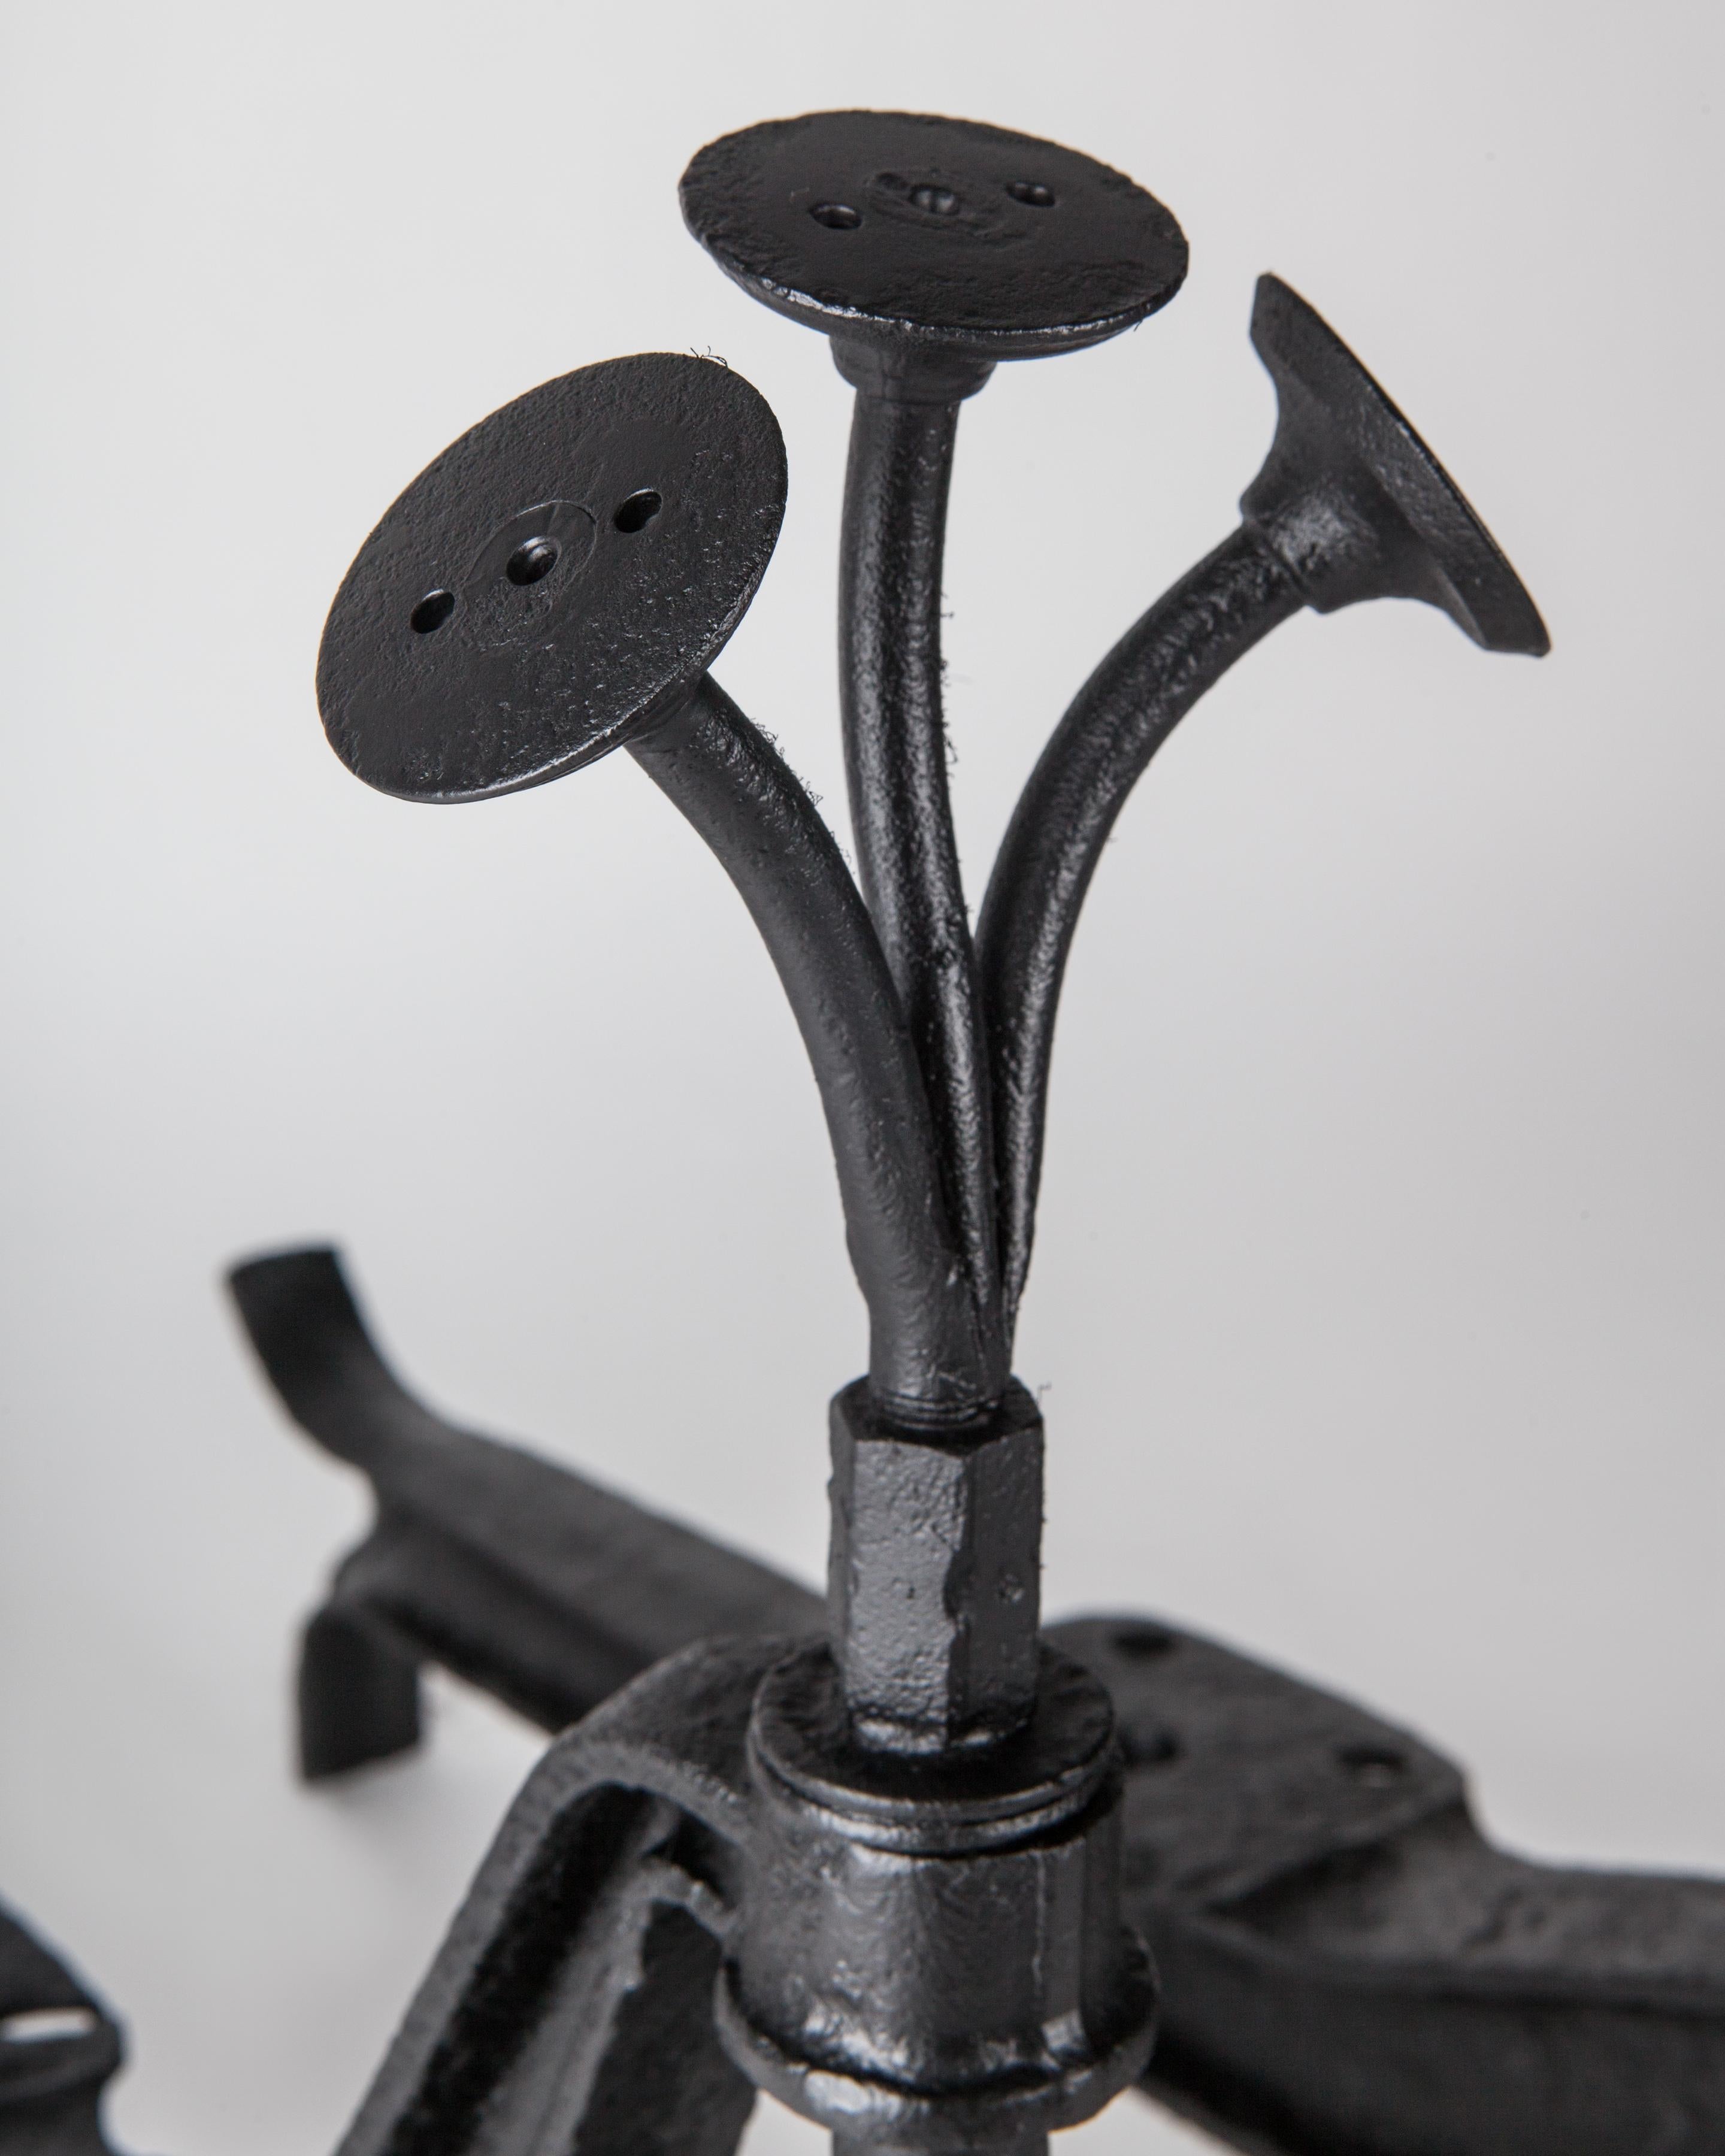 Mid-20th Century Folk Art Industrial Forged and Blackened Iron Andirons with Scroll Feet, c. 1940 For Sale